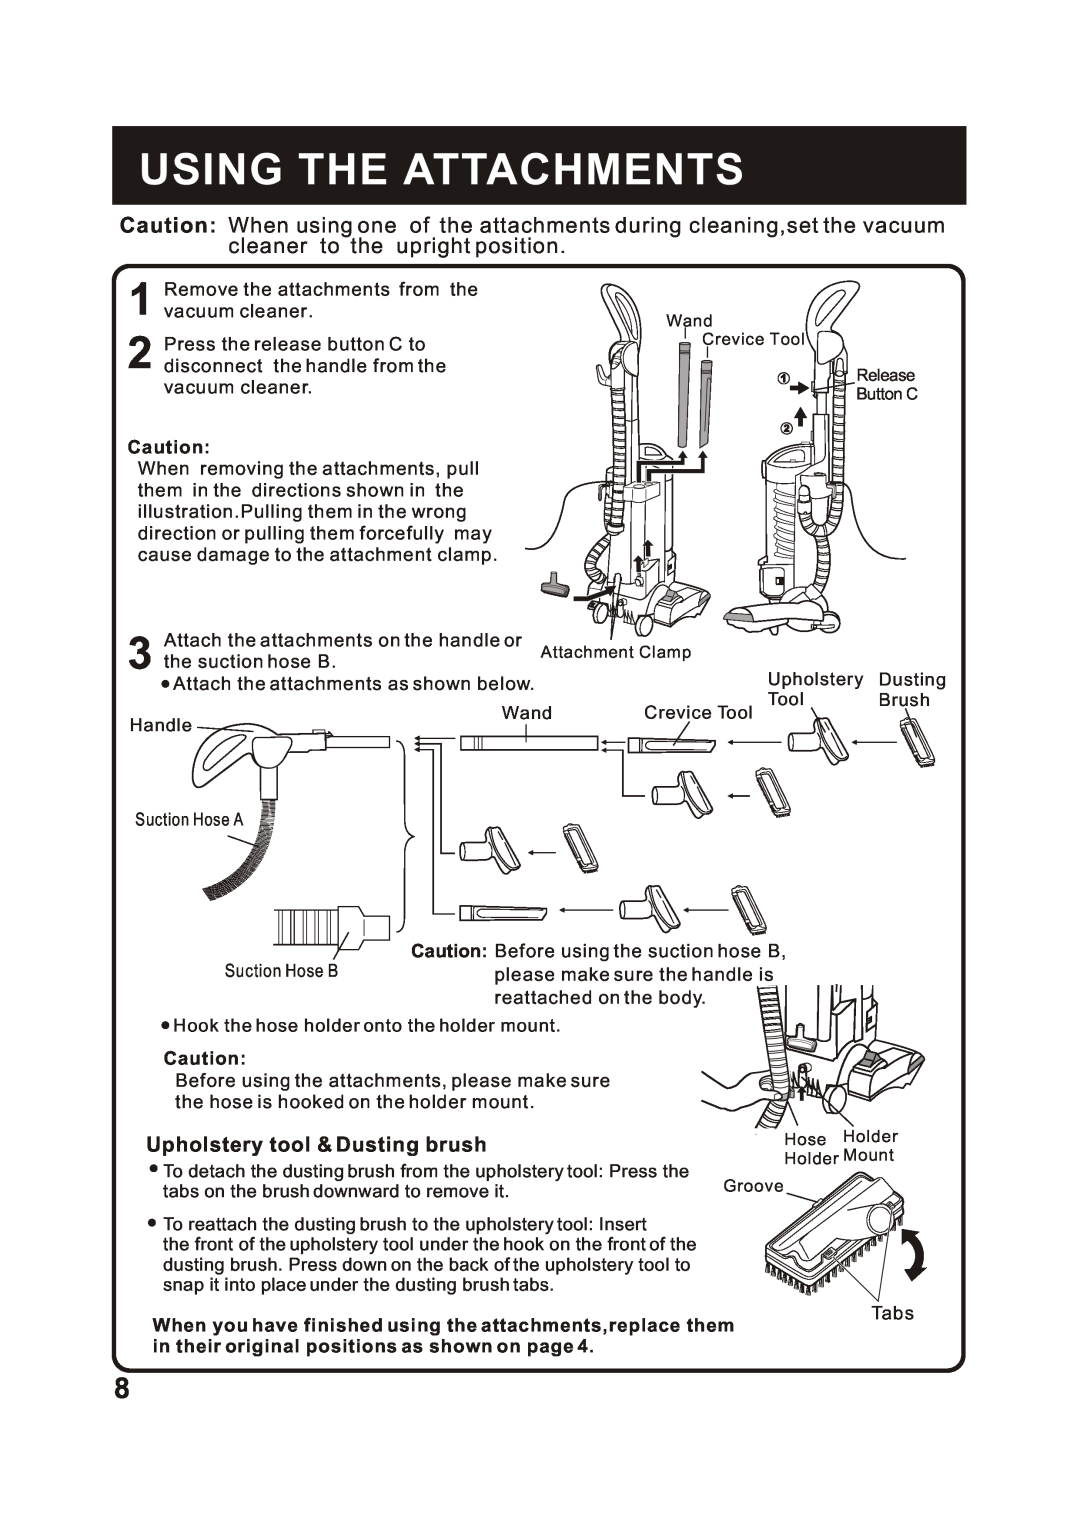 Fantom Vacuum FM742H instruction manual Using The Attachments, Upholstery tool & Dusting brush 